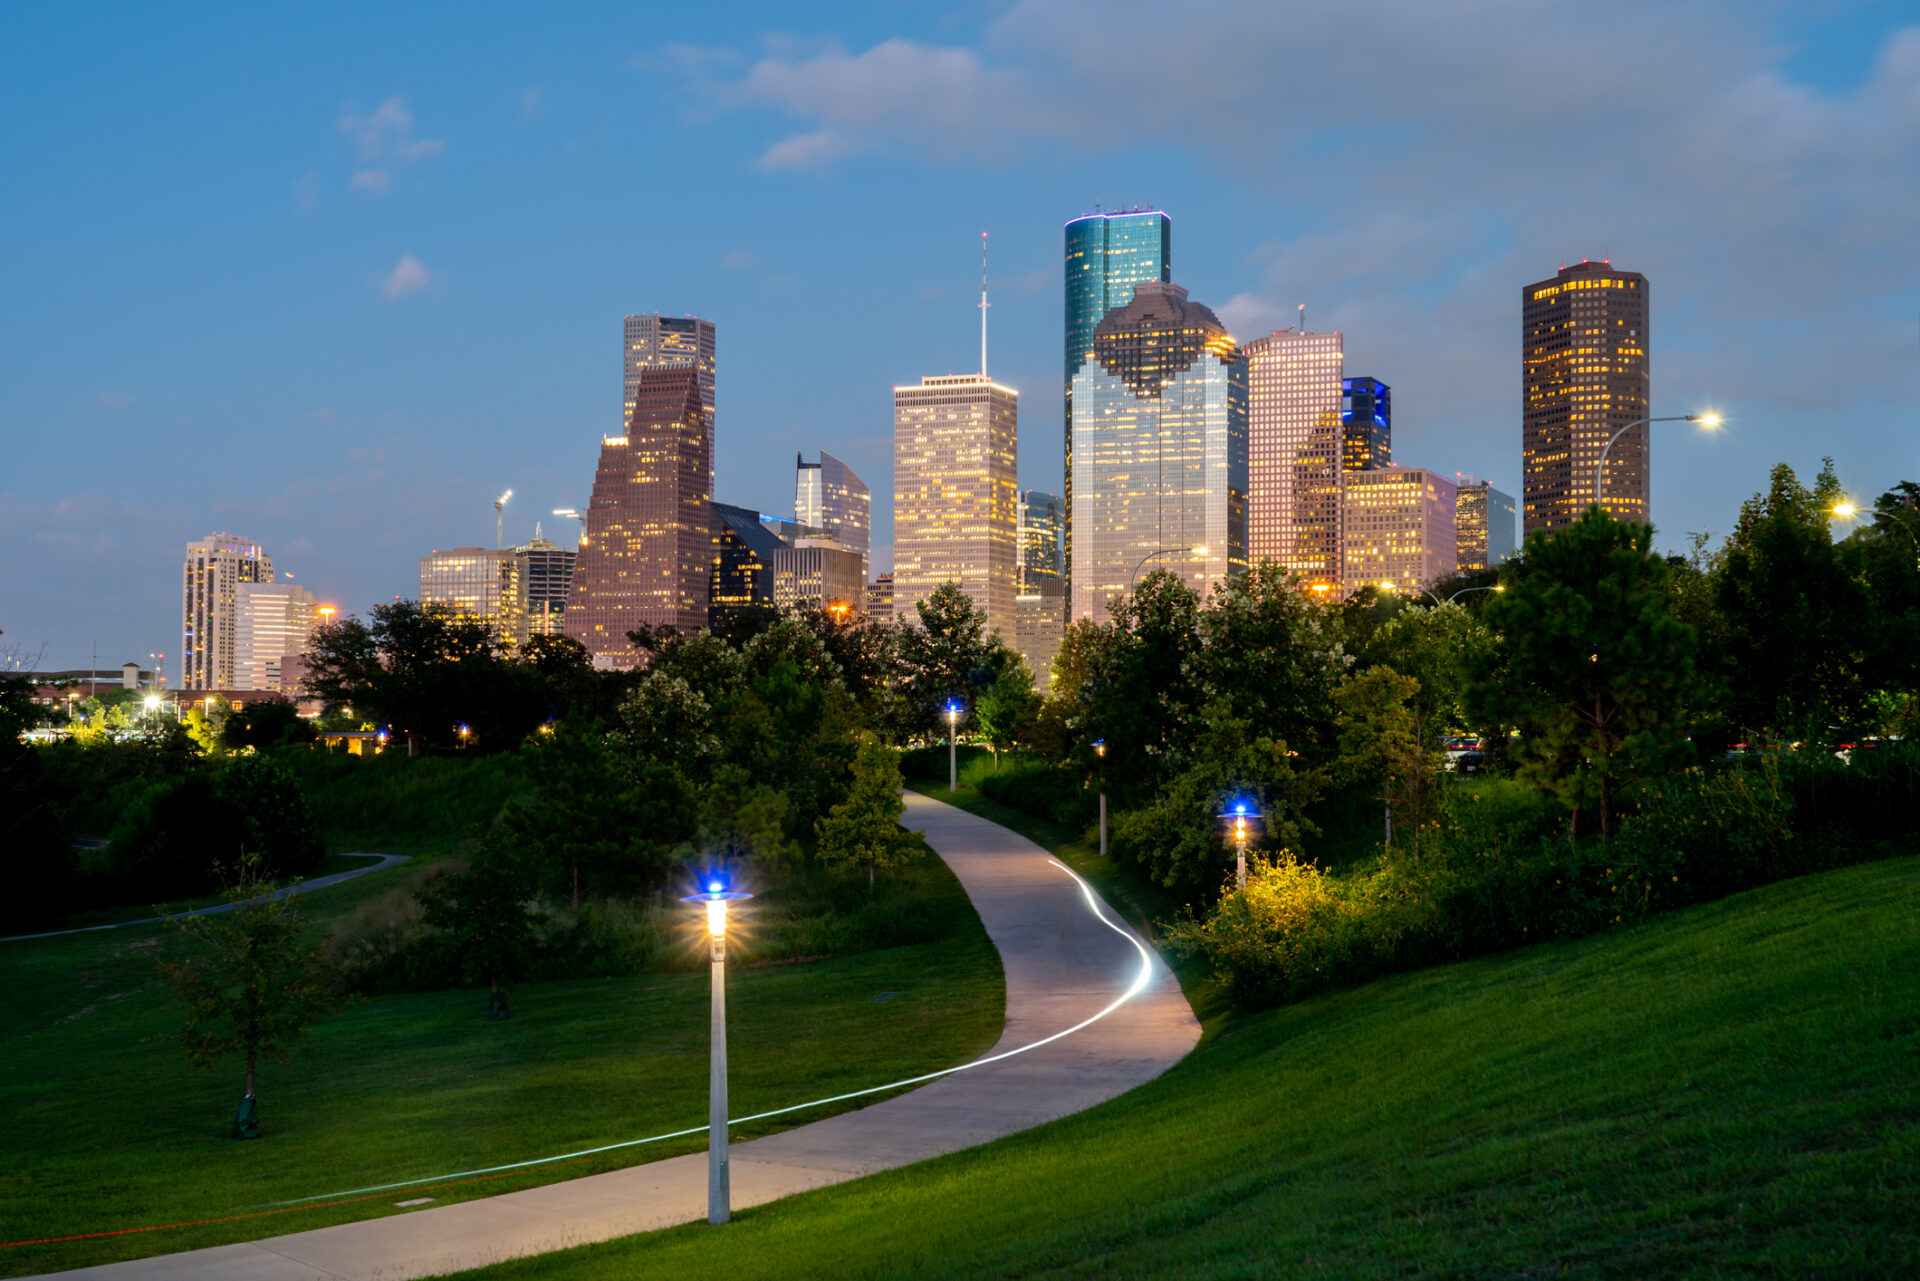 View of Houston Skyline at Night From Popular Park